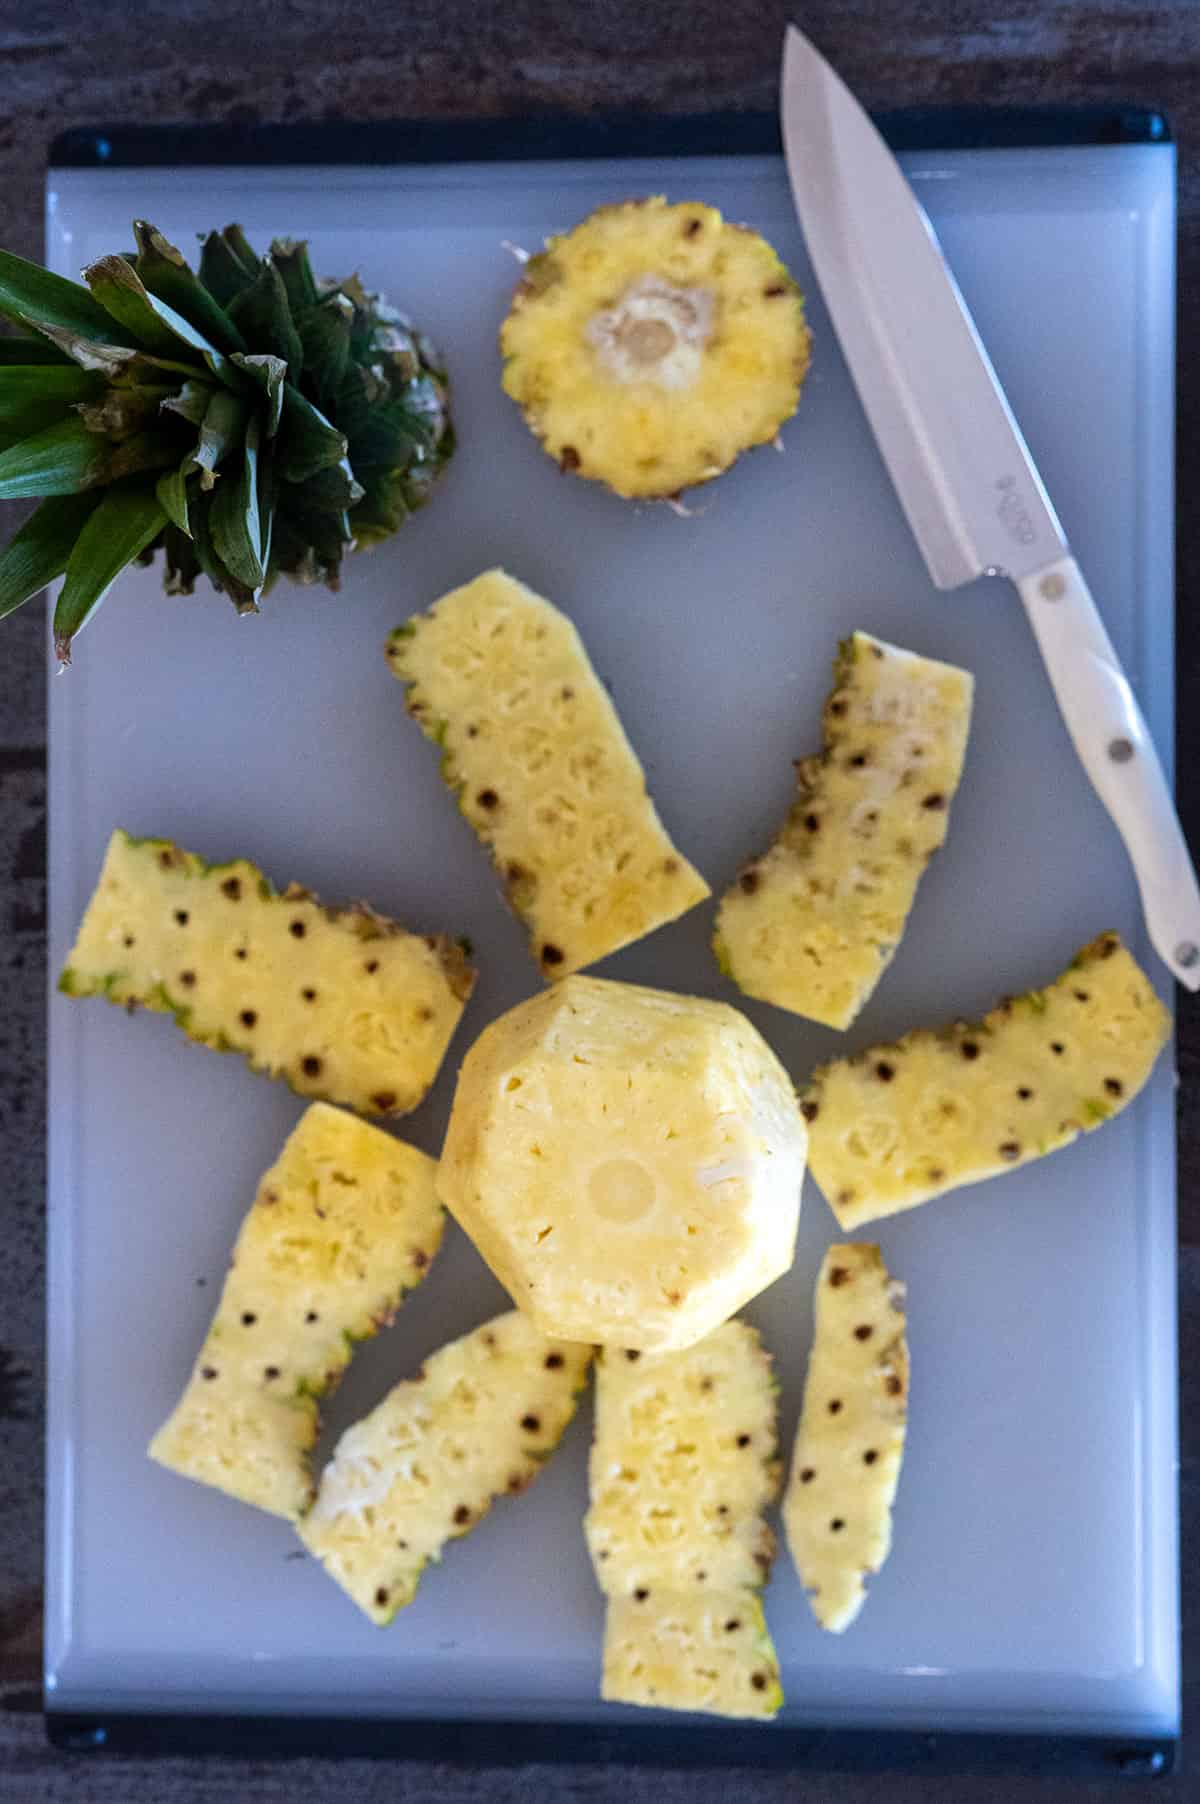 Pineapple with rind removed.